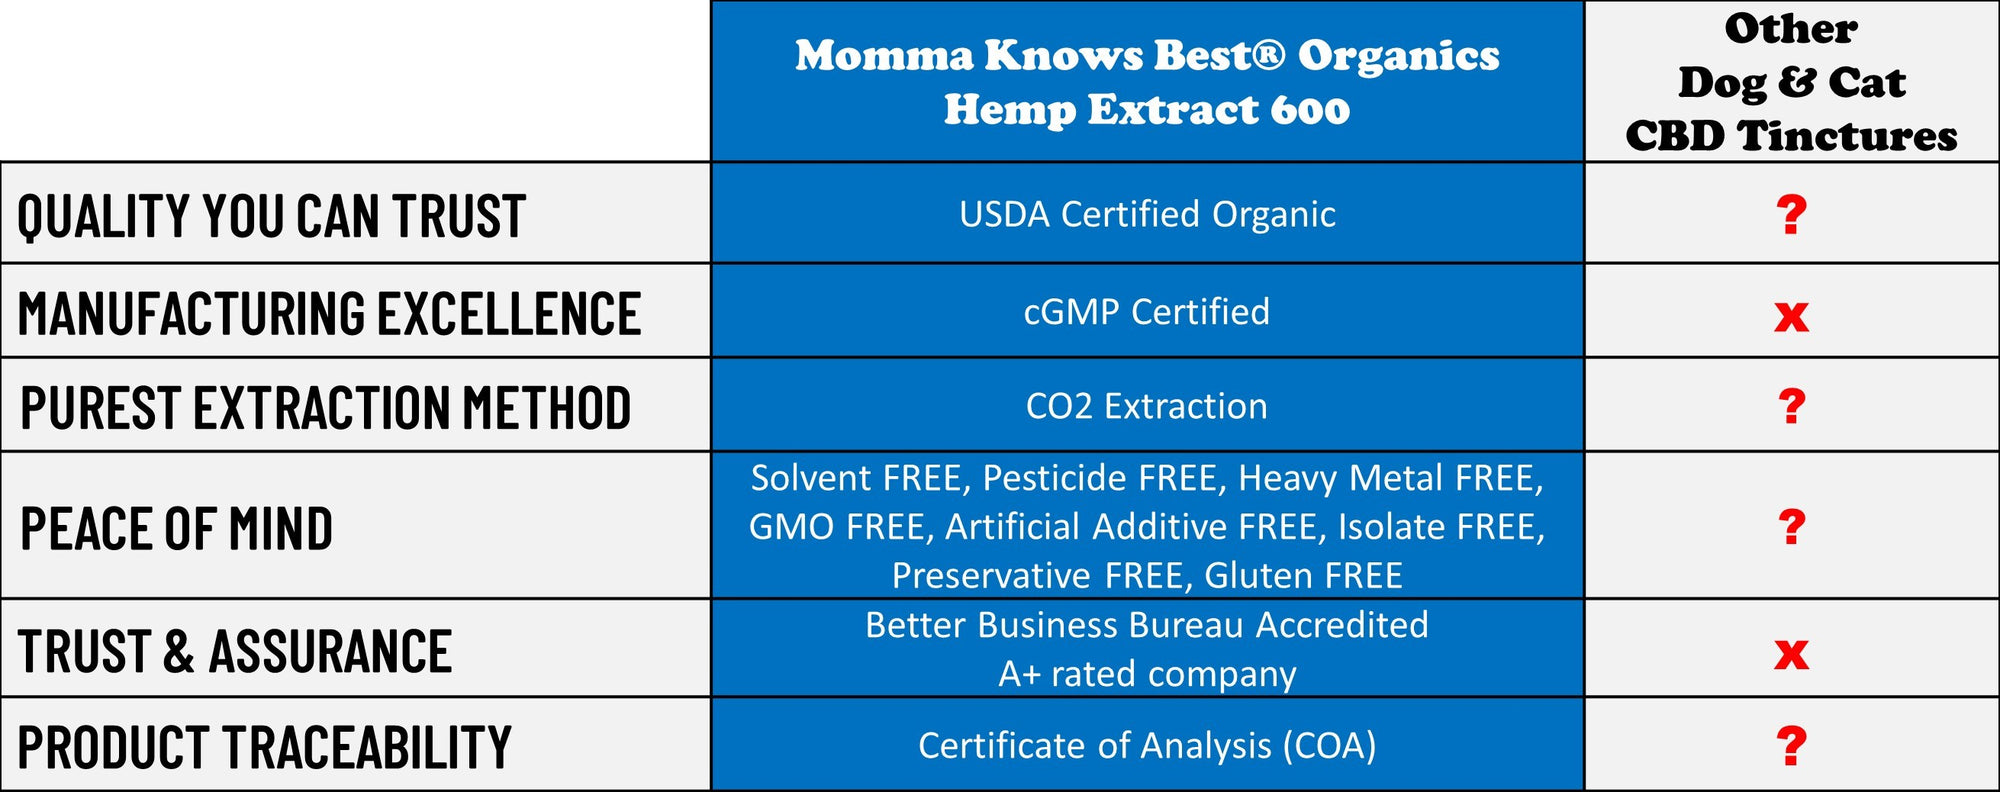 Momma Knows Best® USDA certified organic Hemp Extract comparison chart